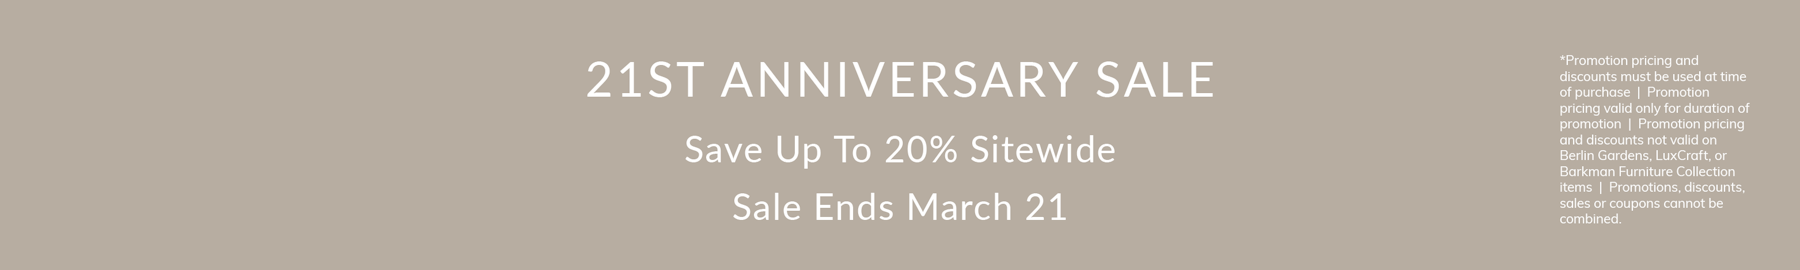 21st Anniversary Sitewide Sale